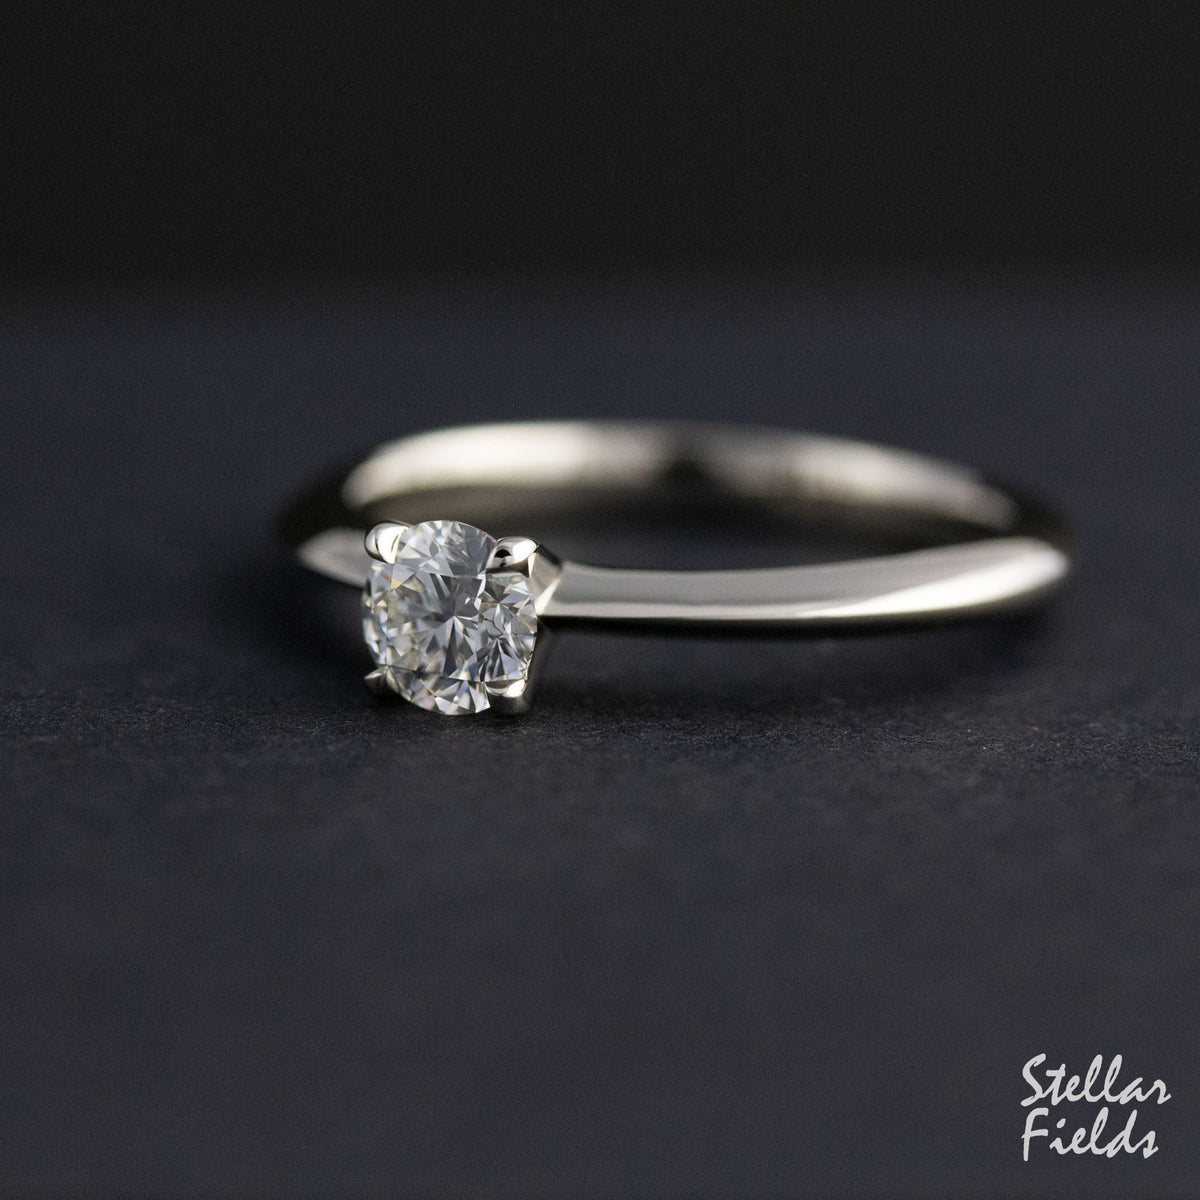 Custom Solitaire Moissanite Engagement Ring Handcrafted Stellar Field